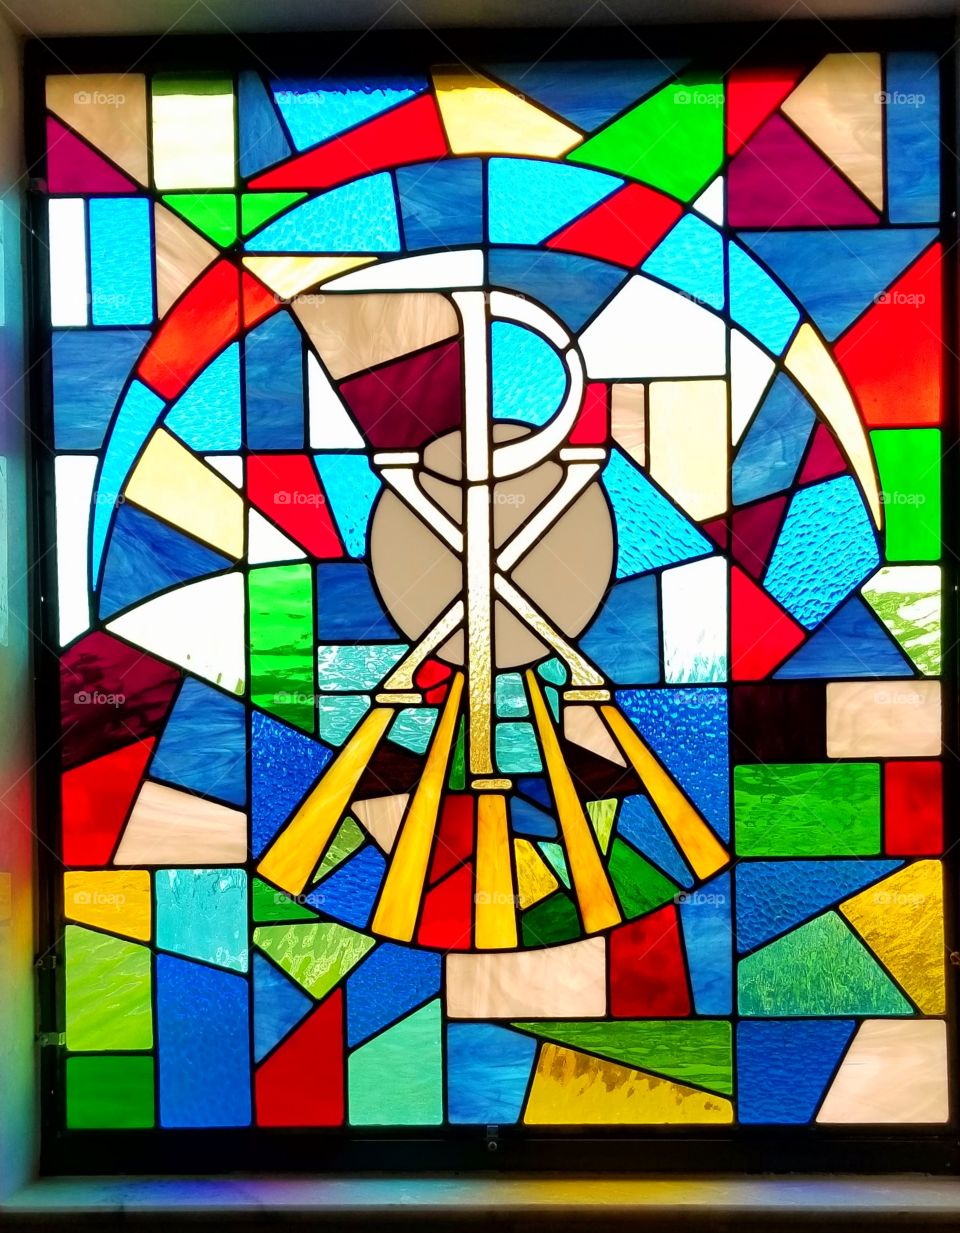 beautiful stained.glass, lots of fantastic colors